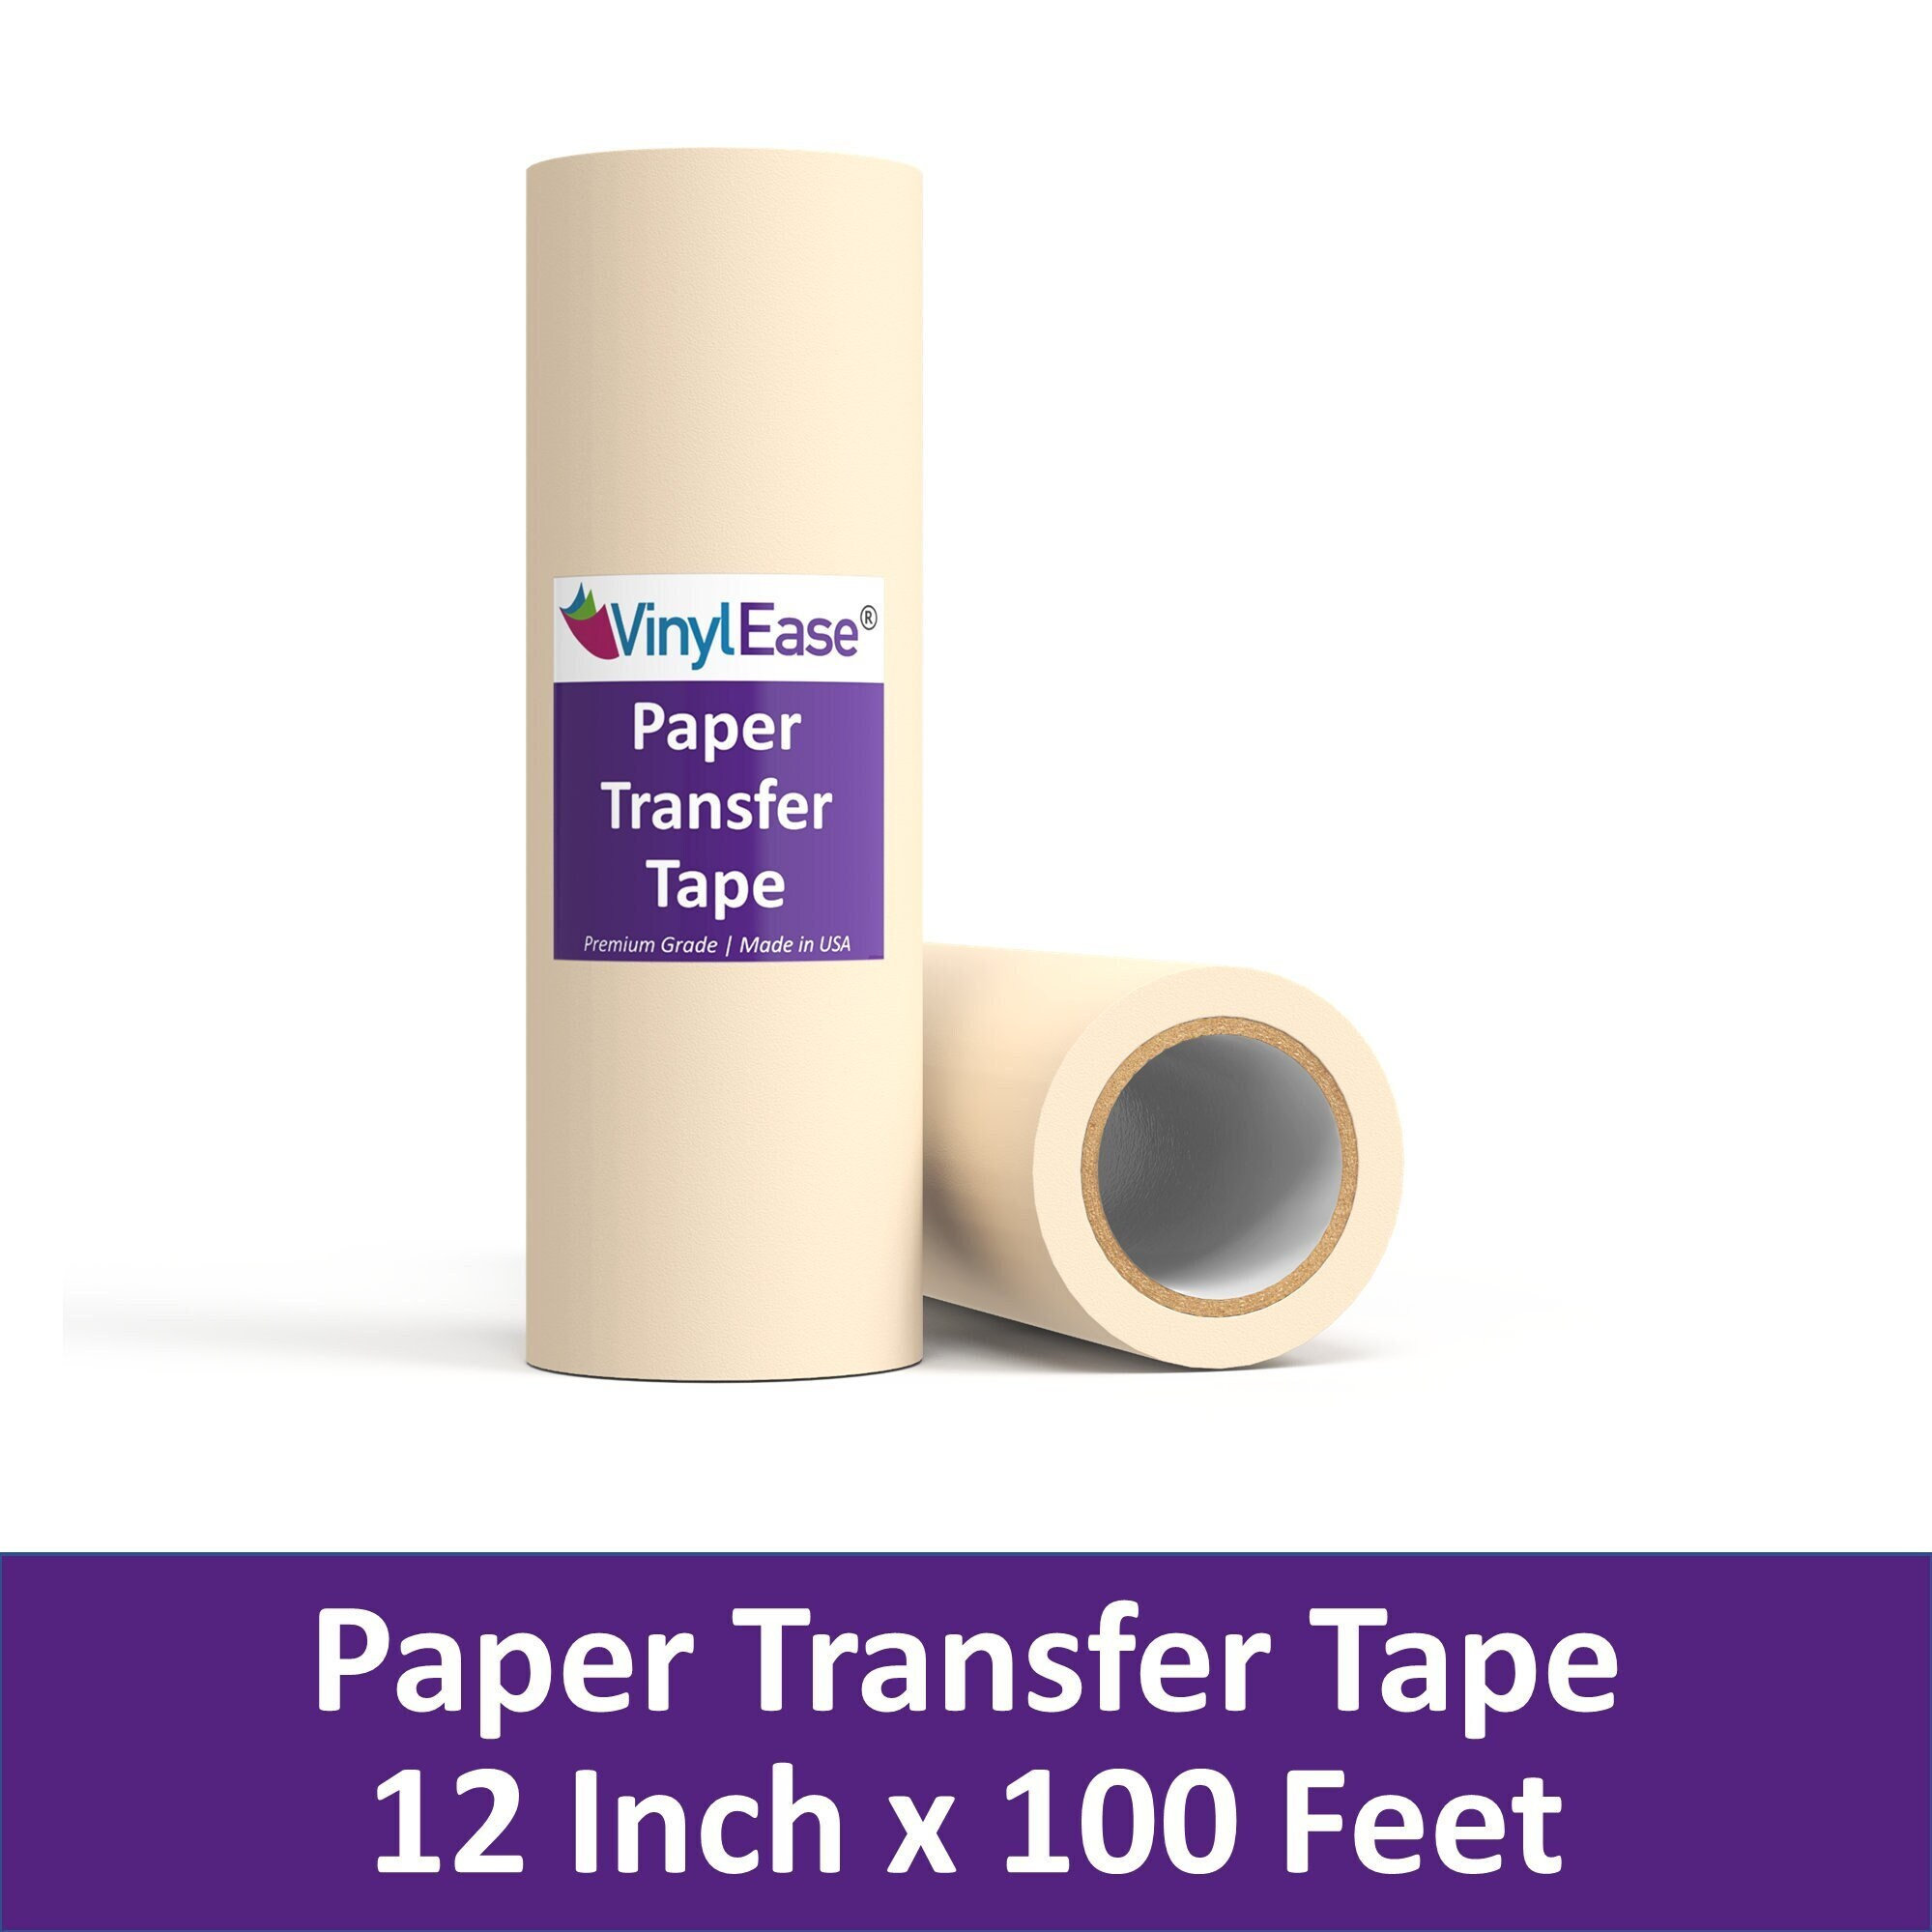 Transparent Heat Transfer Tape for Sublimation and Vinyl 10mm X 33mm No  Residue 